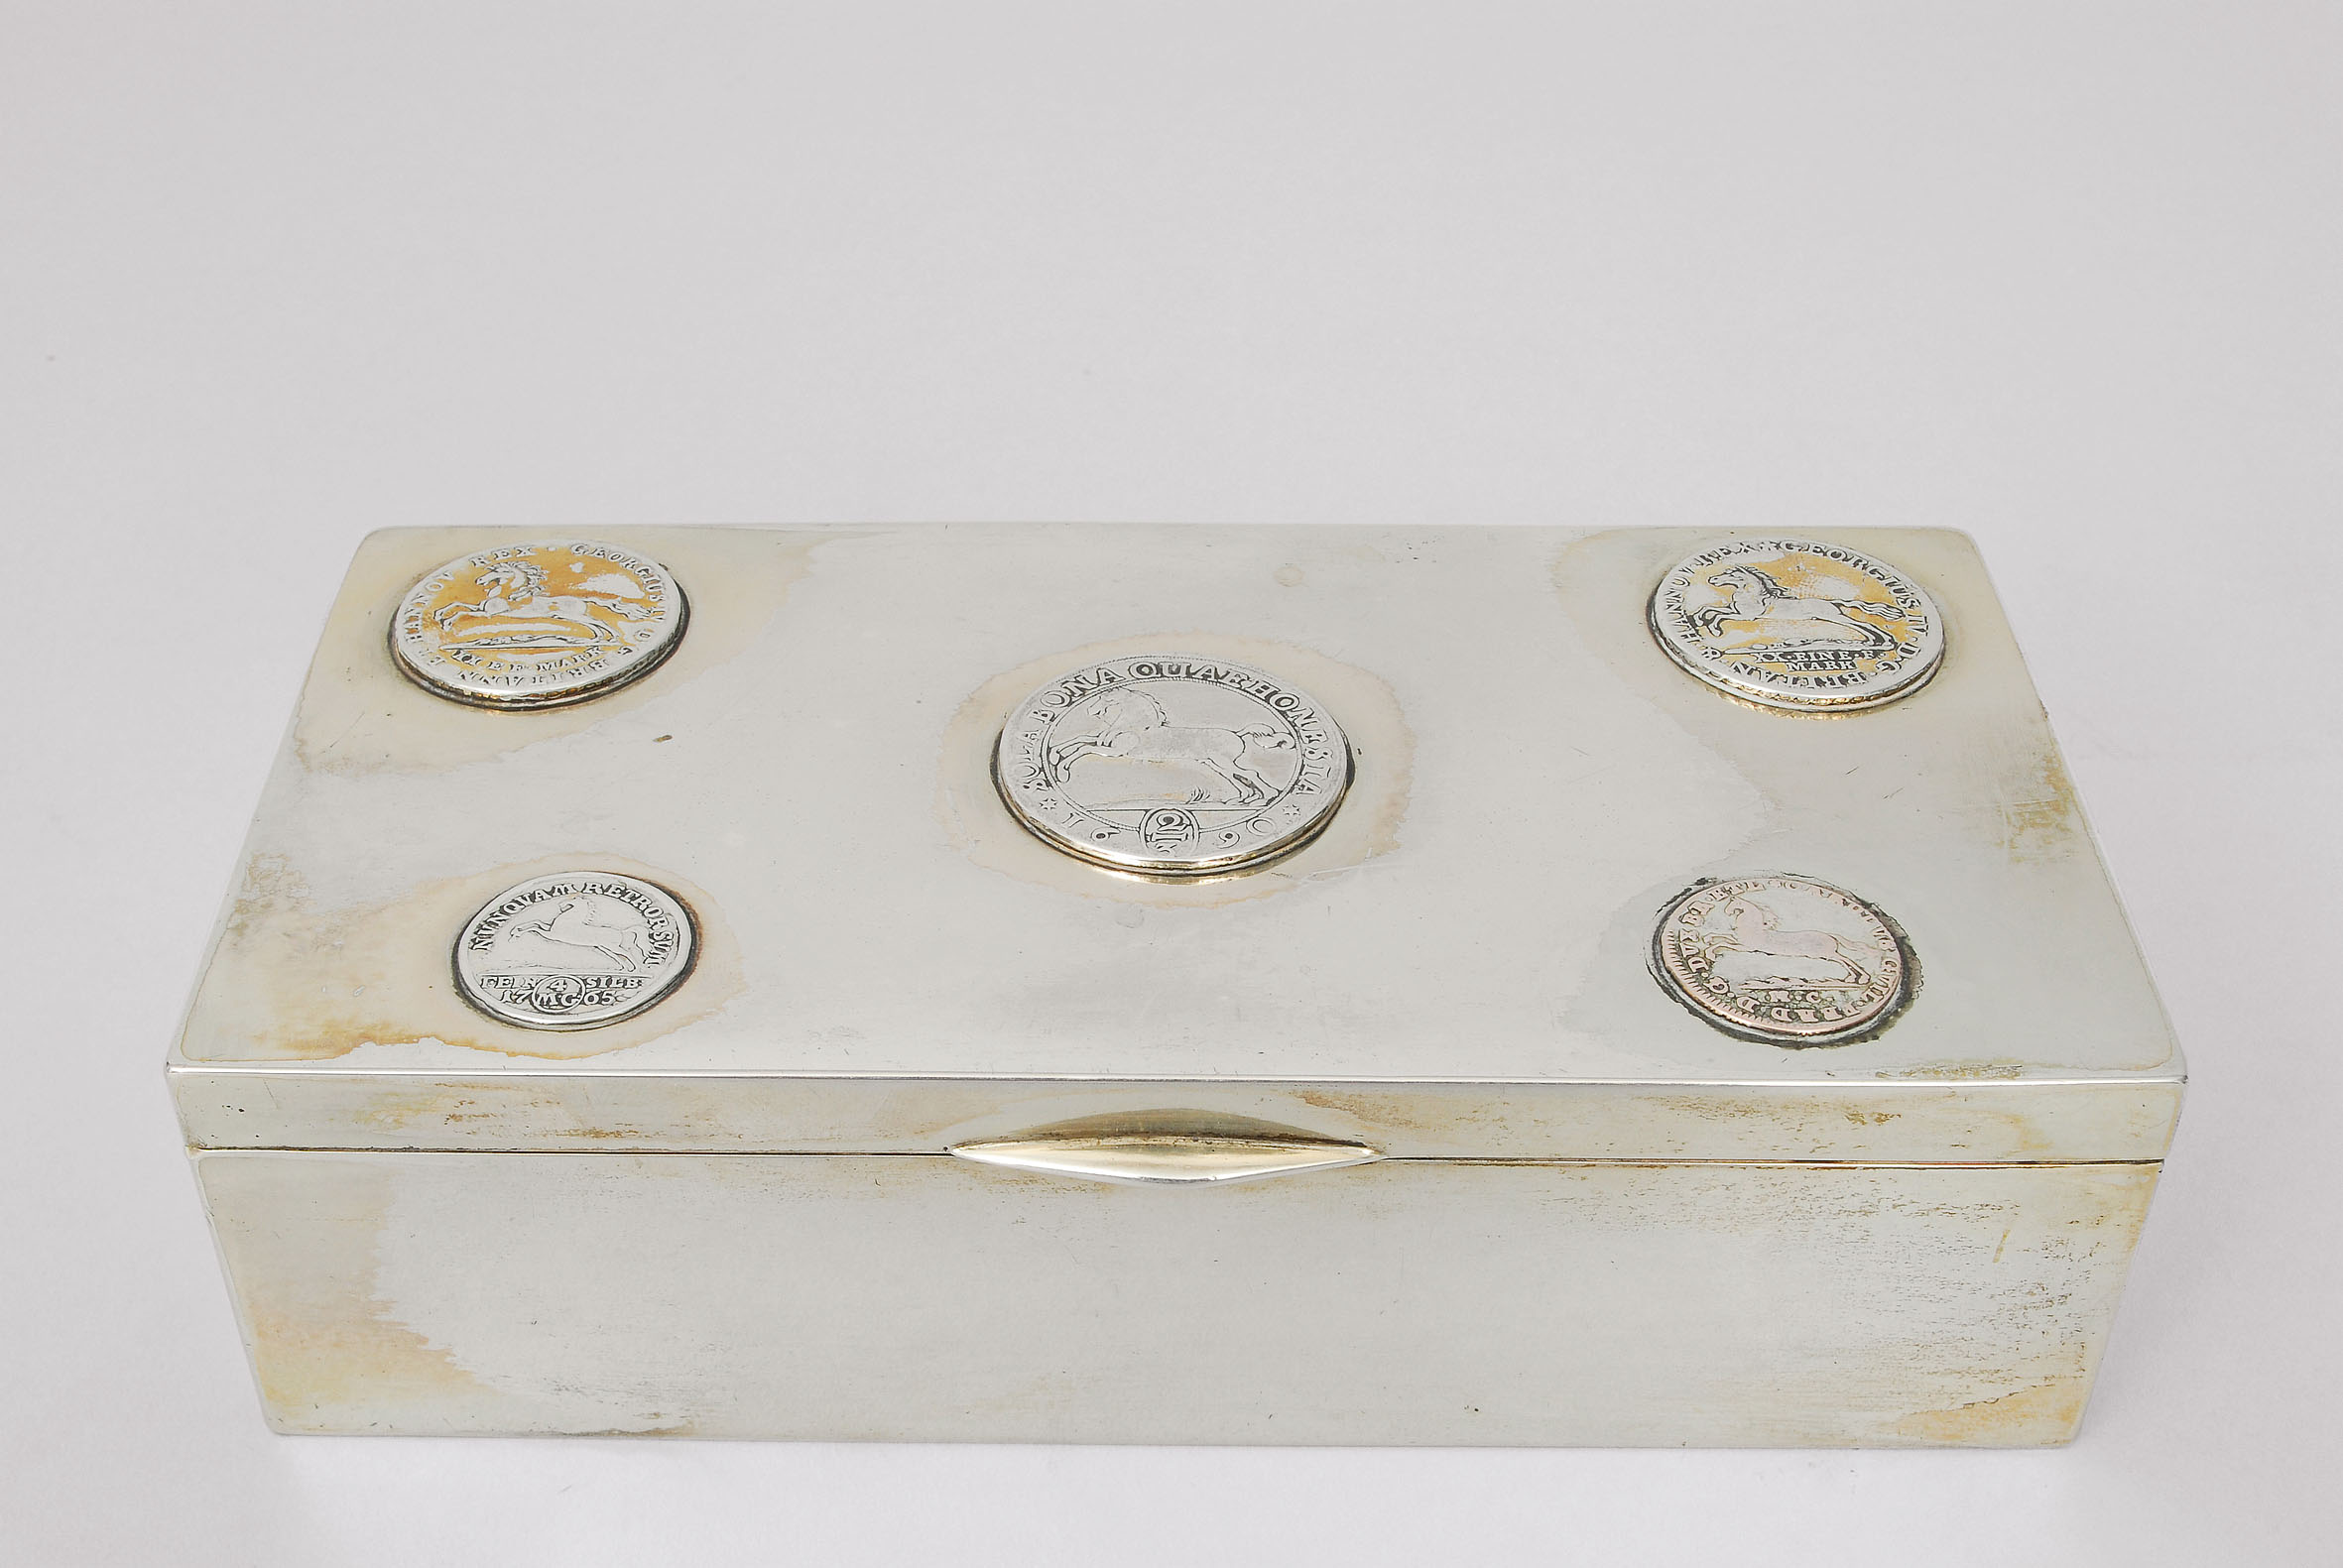 A box with coins